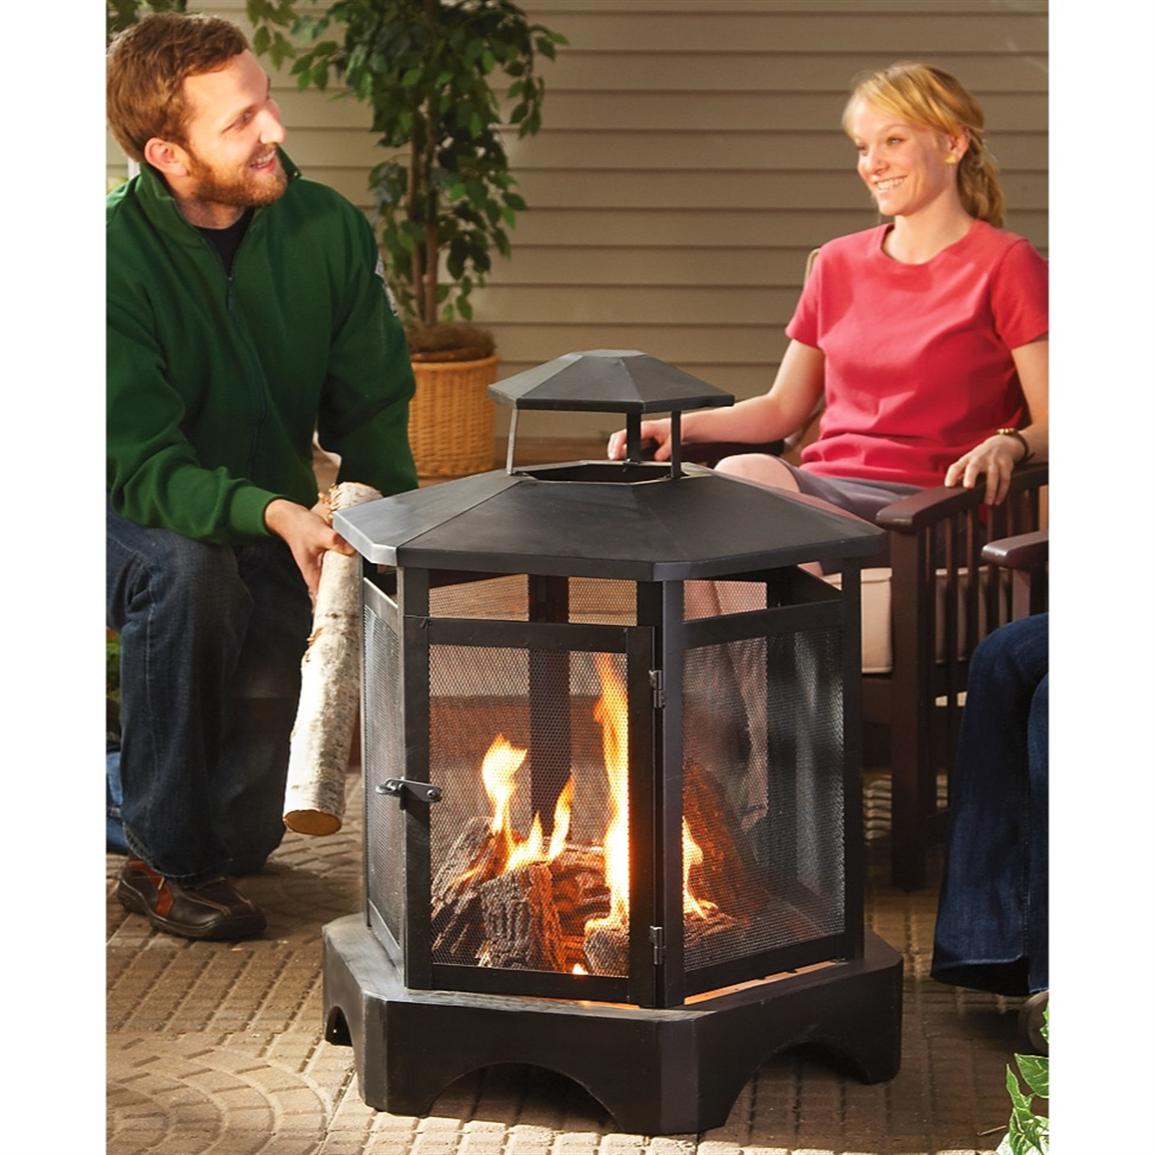 Guide Gear® Large Hexagonal Fire Pit - 198371, Fire Pits & Patio ...